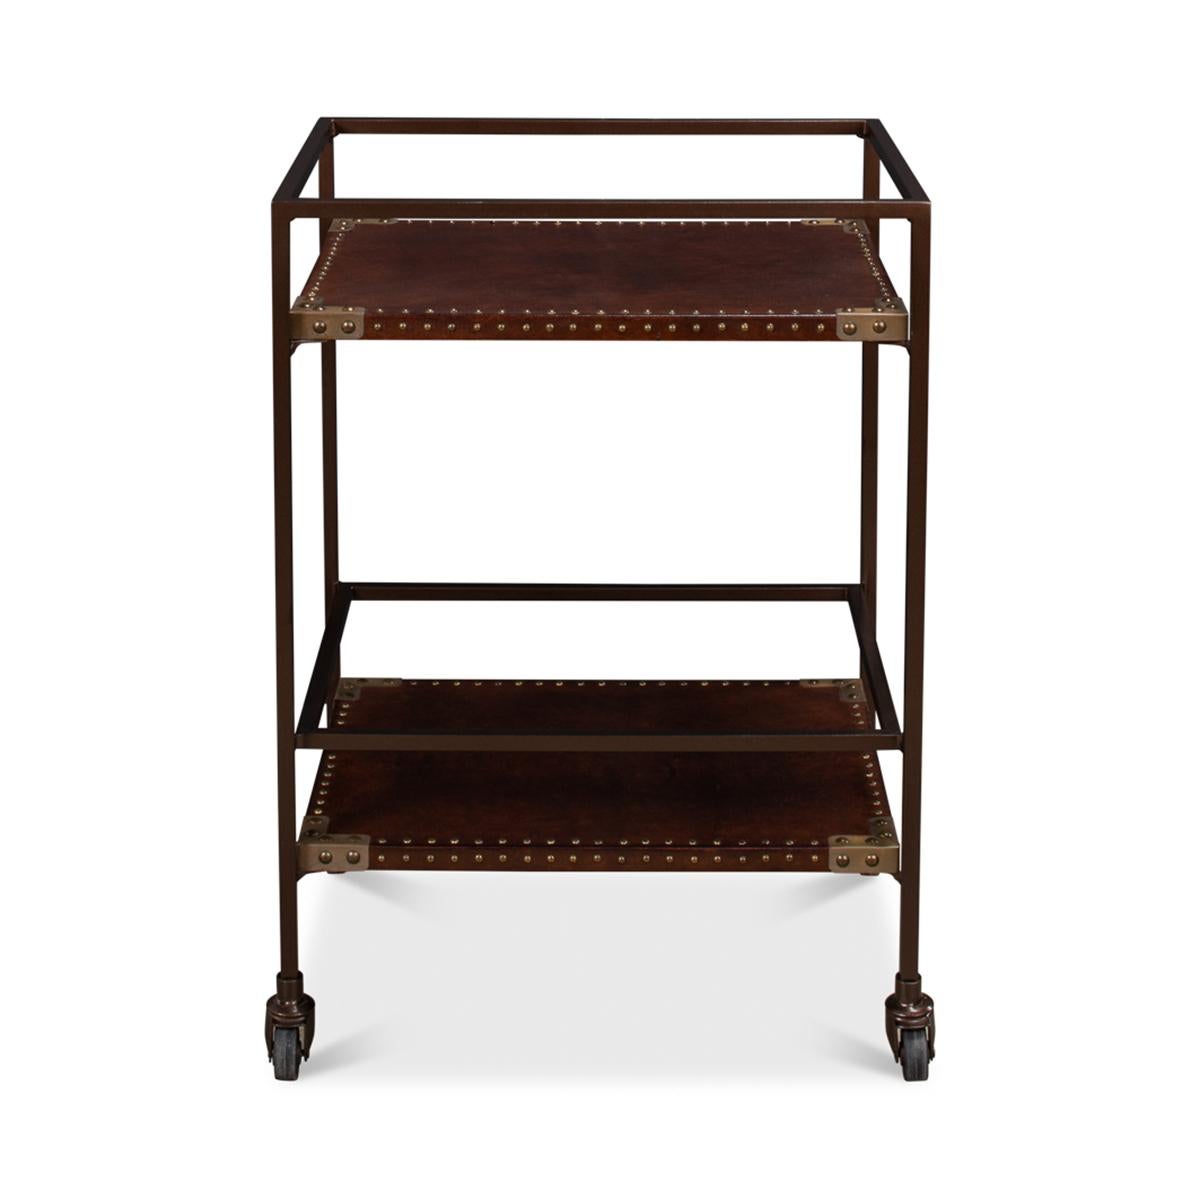 An Industrial leather trolley or bar cart with a bronzed metal frame with two leather-wrapped shelves with nailhead trim on large caster feet.

Dimensions: 18